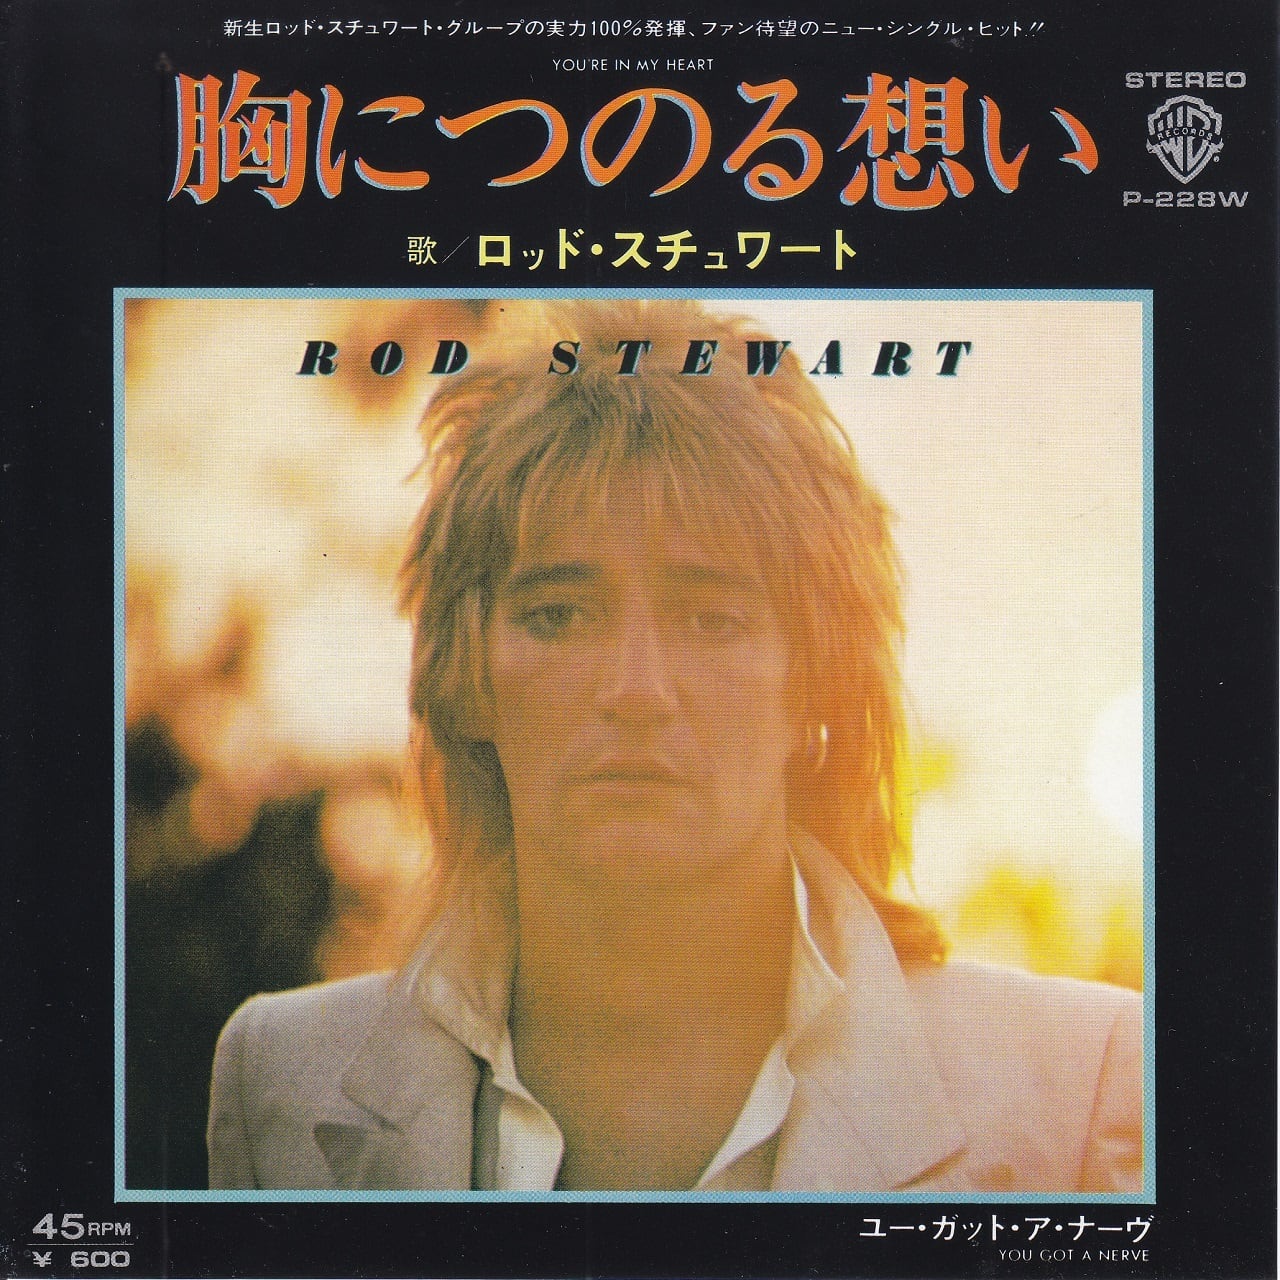 【7inch】Rod Stewart - You're In My Heart 胸につのる想い／ロッド